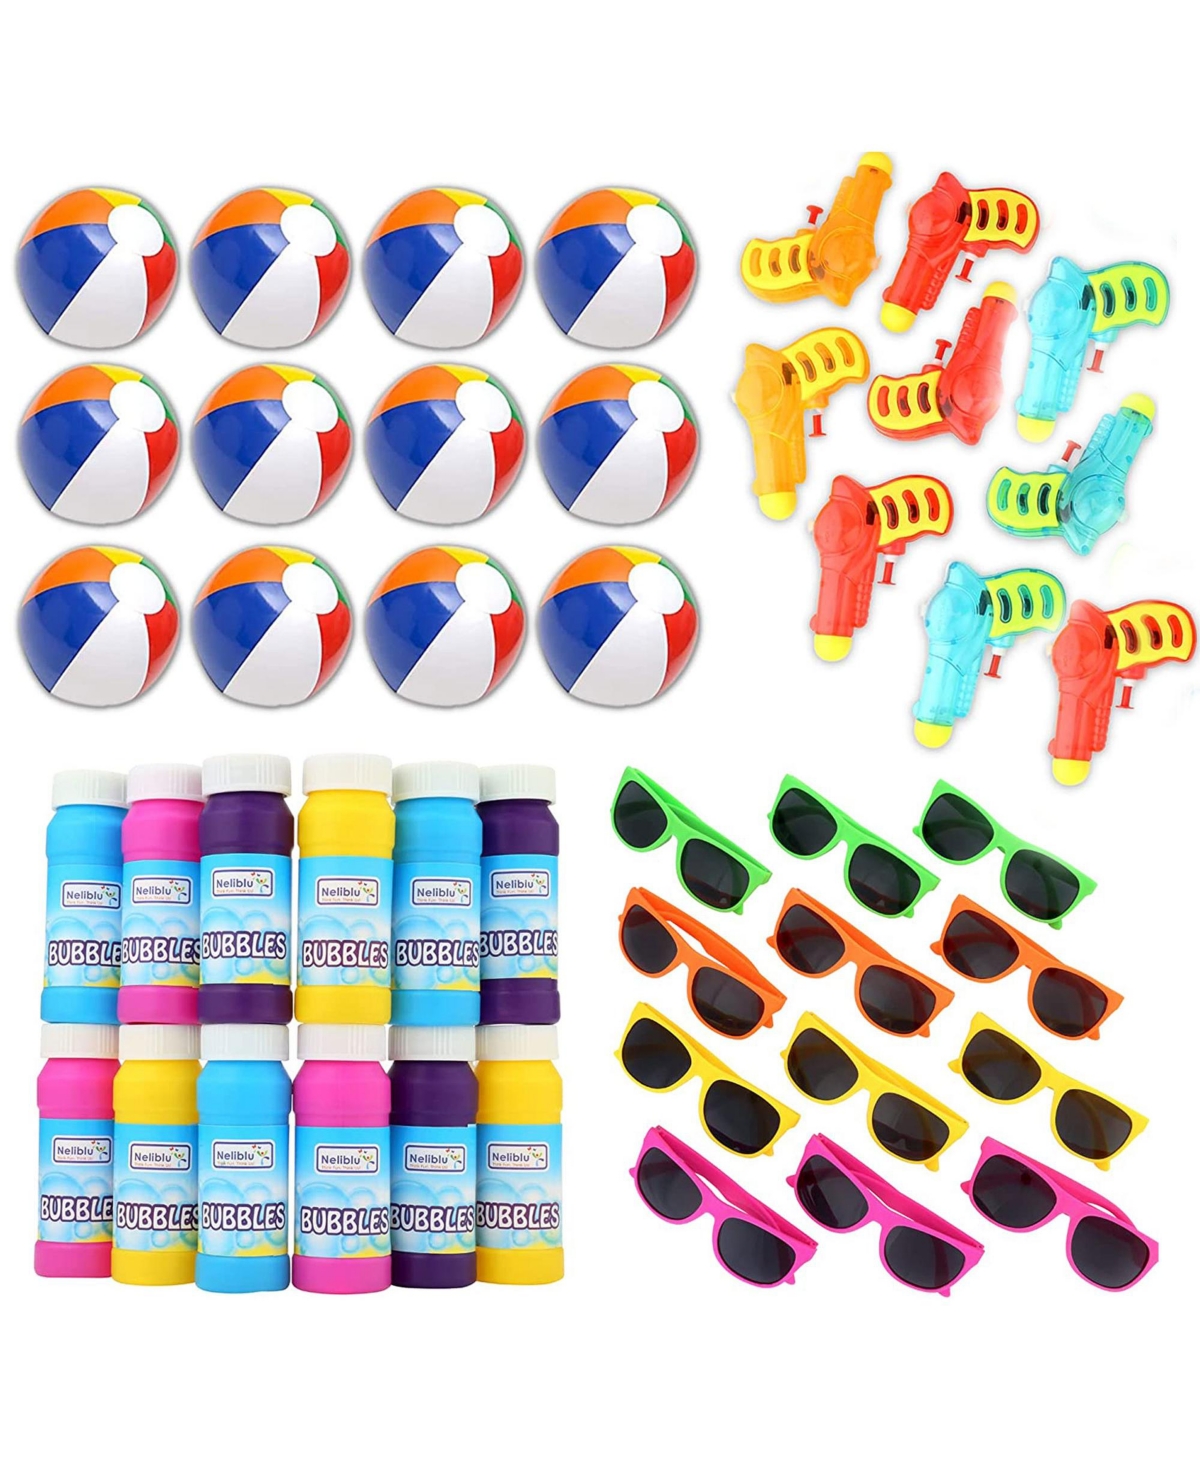 Mega Pool Party and Beach Party Favors - Bulk Pack of 48 Summer Fun Toy Mega Assortment of Kids Toys Includes - Kids Sunglasses Party Favors, Inflatable Beach Balls, Water Gun Squirts and Bubbles